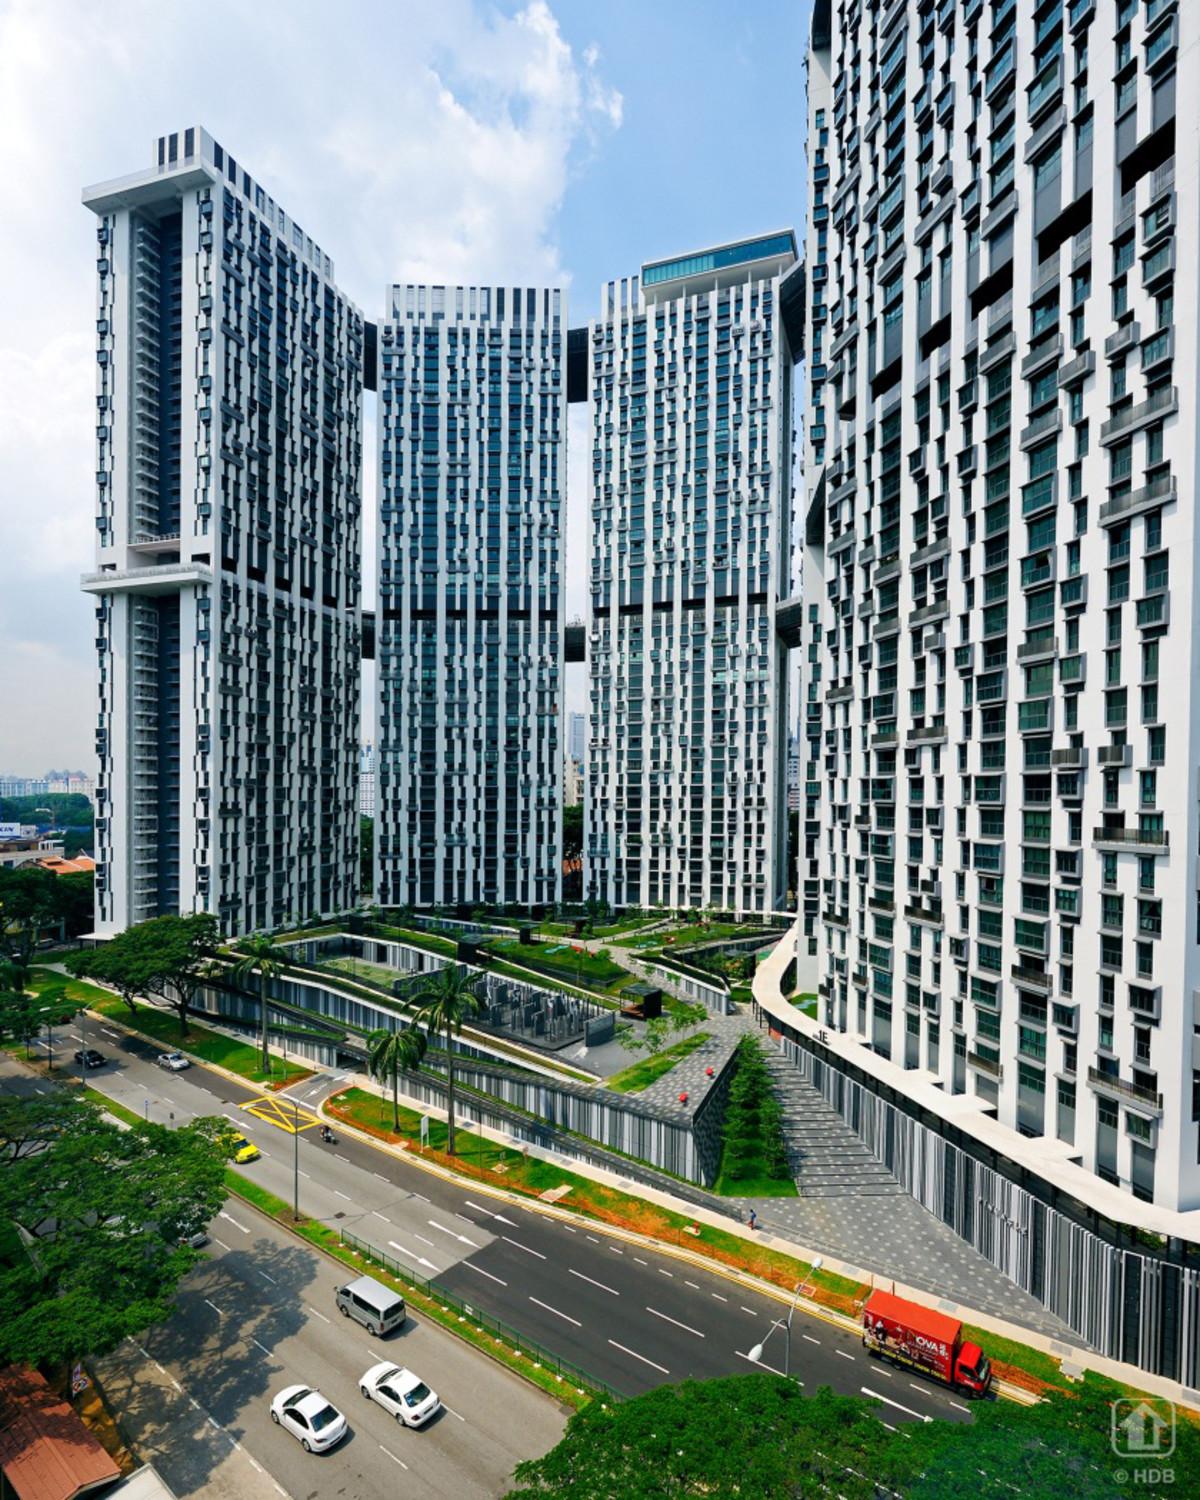 Overall view of the Pinnacle@Duxton, seen from Cantonment Road, with the unique façade in full view.